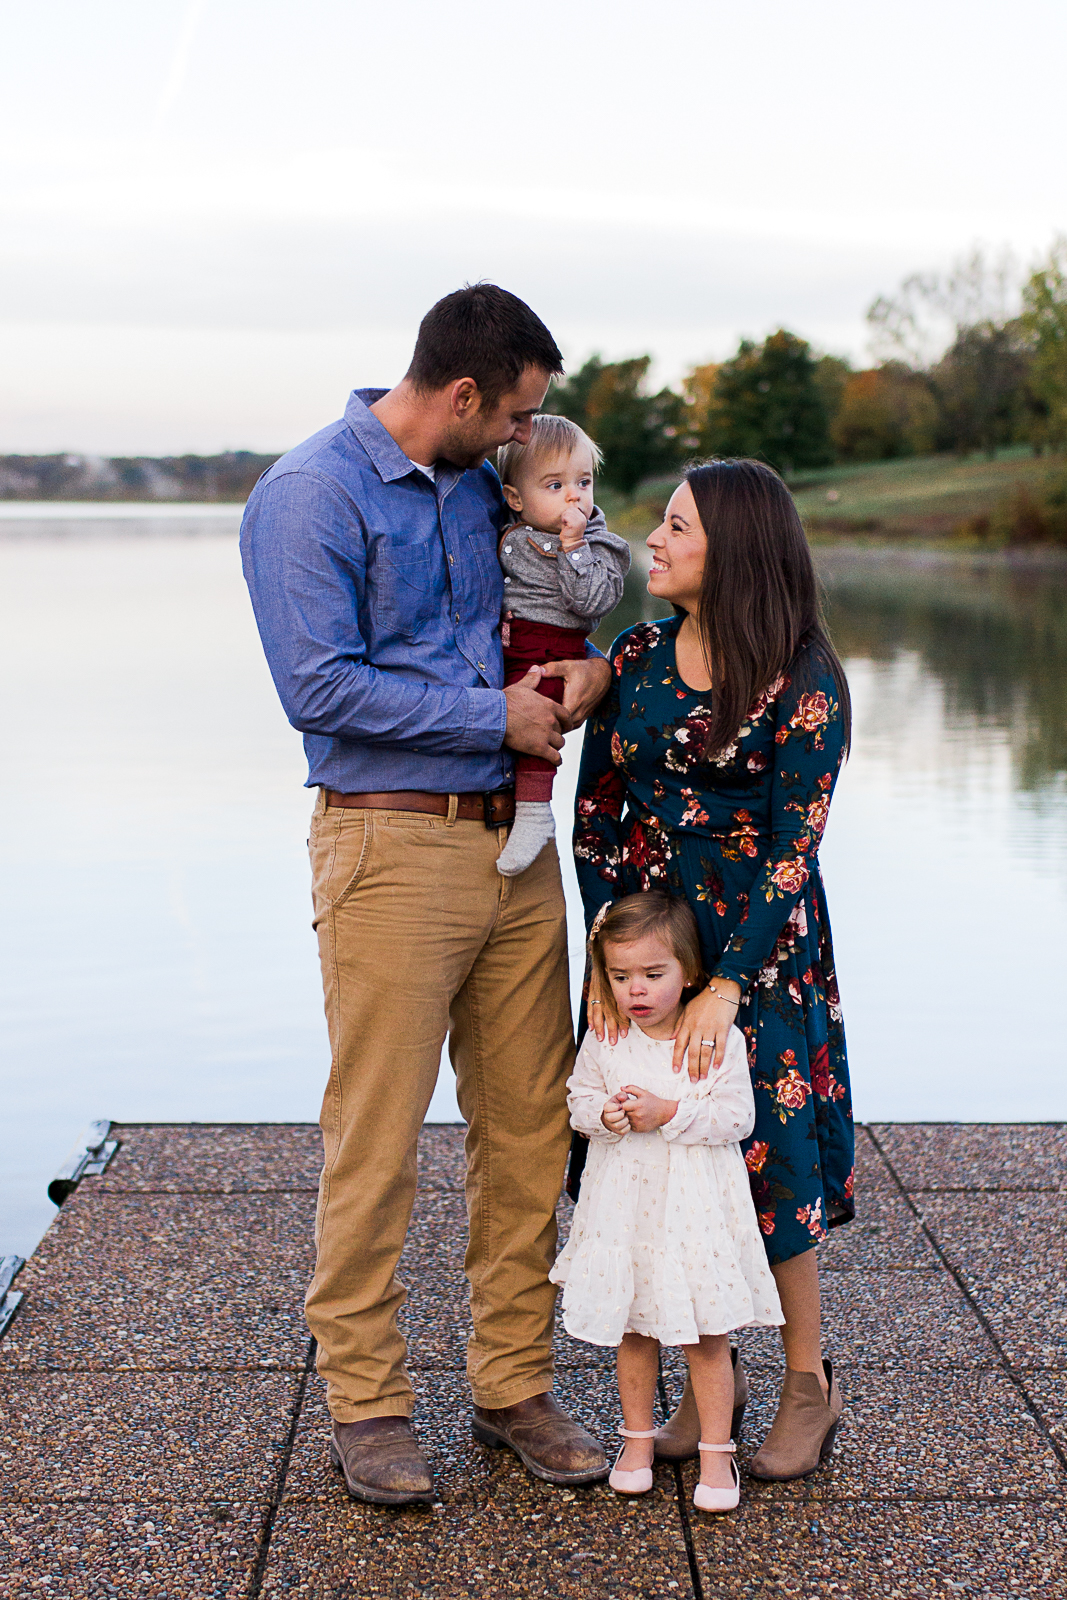  Family photo on the dock, Kansas City lifetyle photographer, sunrise family session at Shawnee Mission Park, Rebecca Clair Photography 